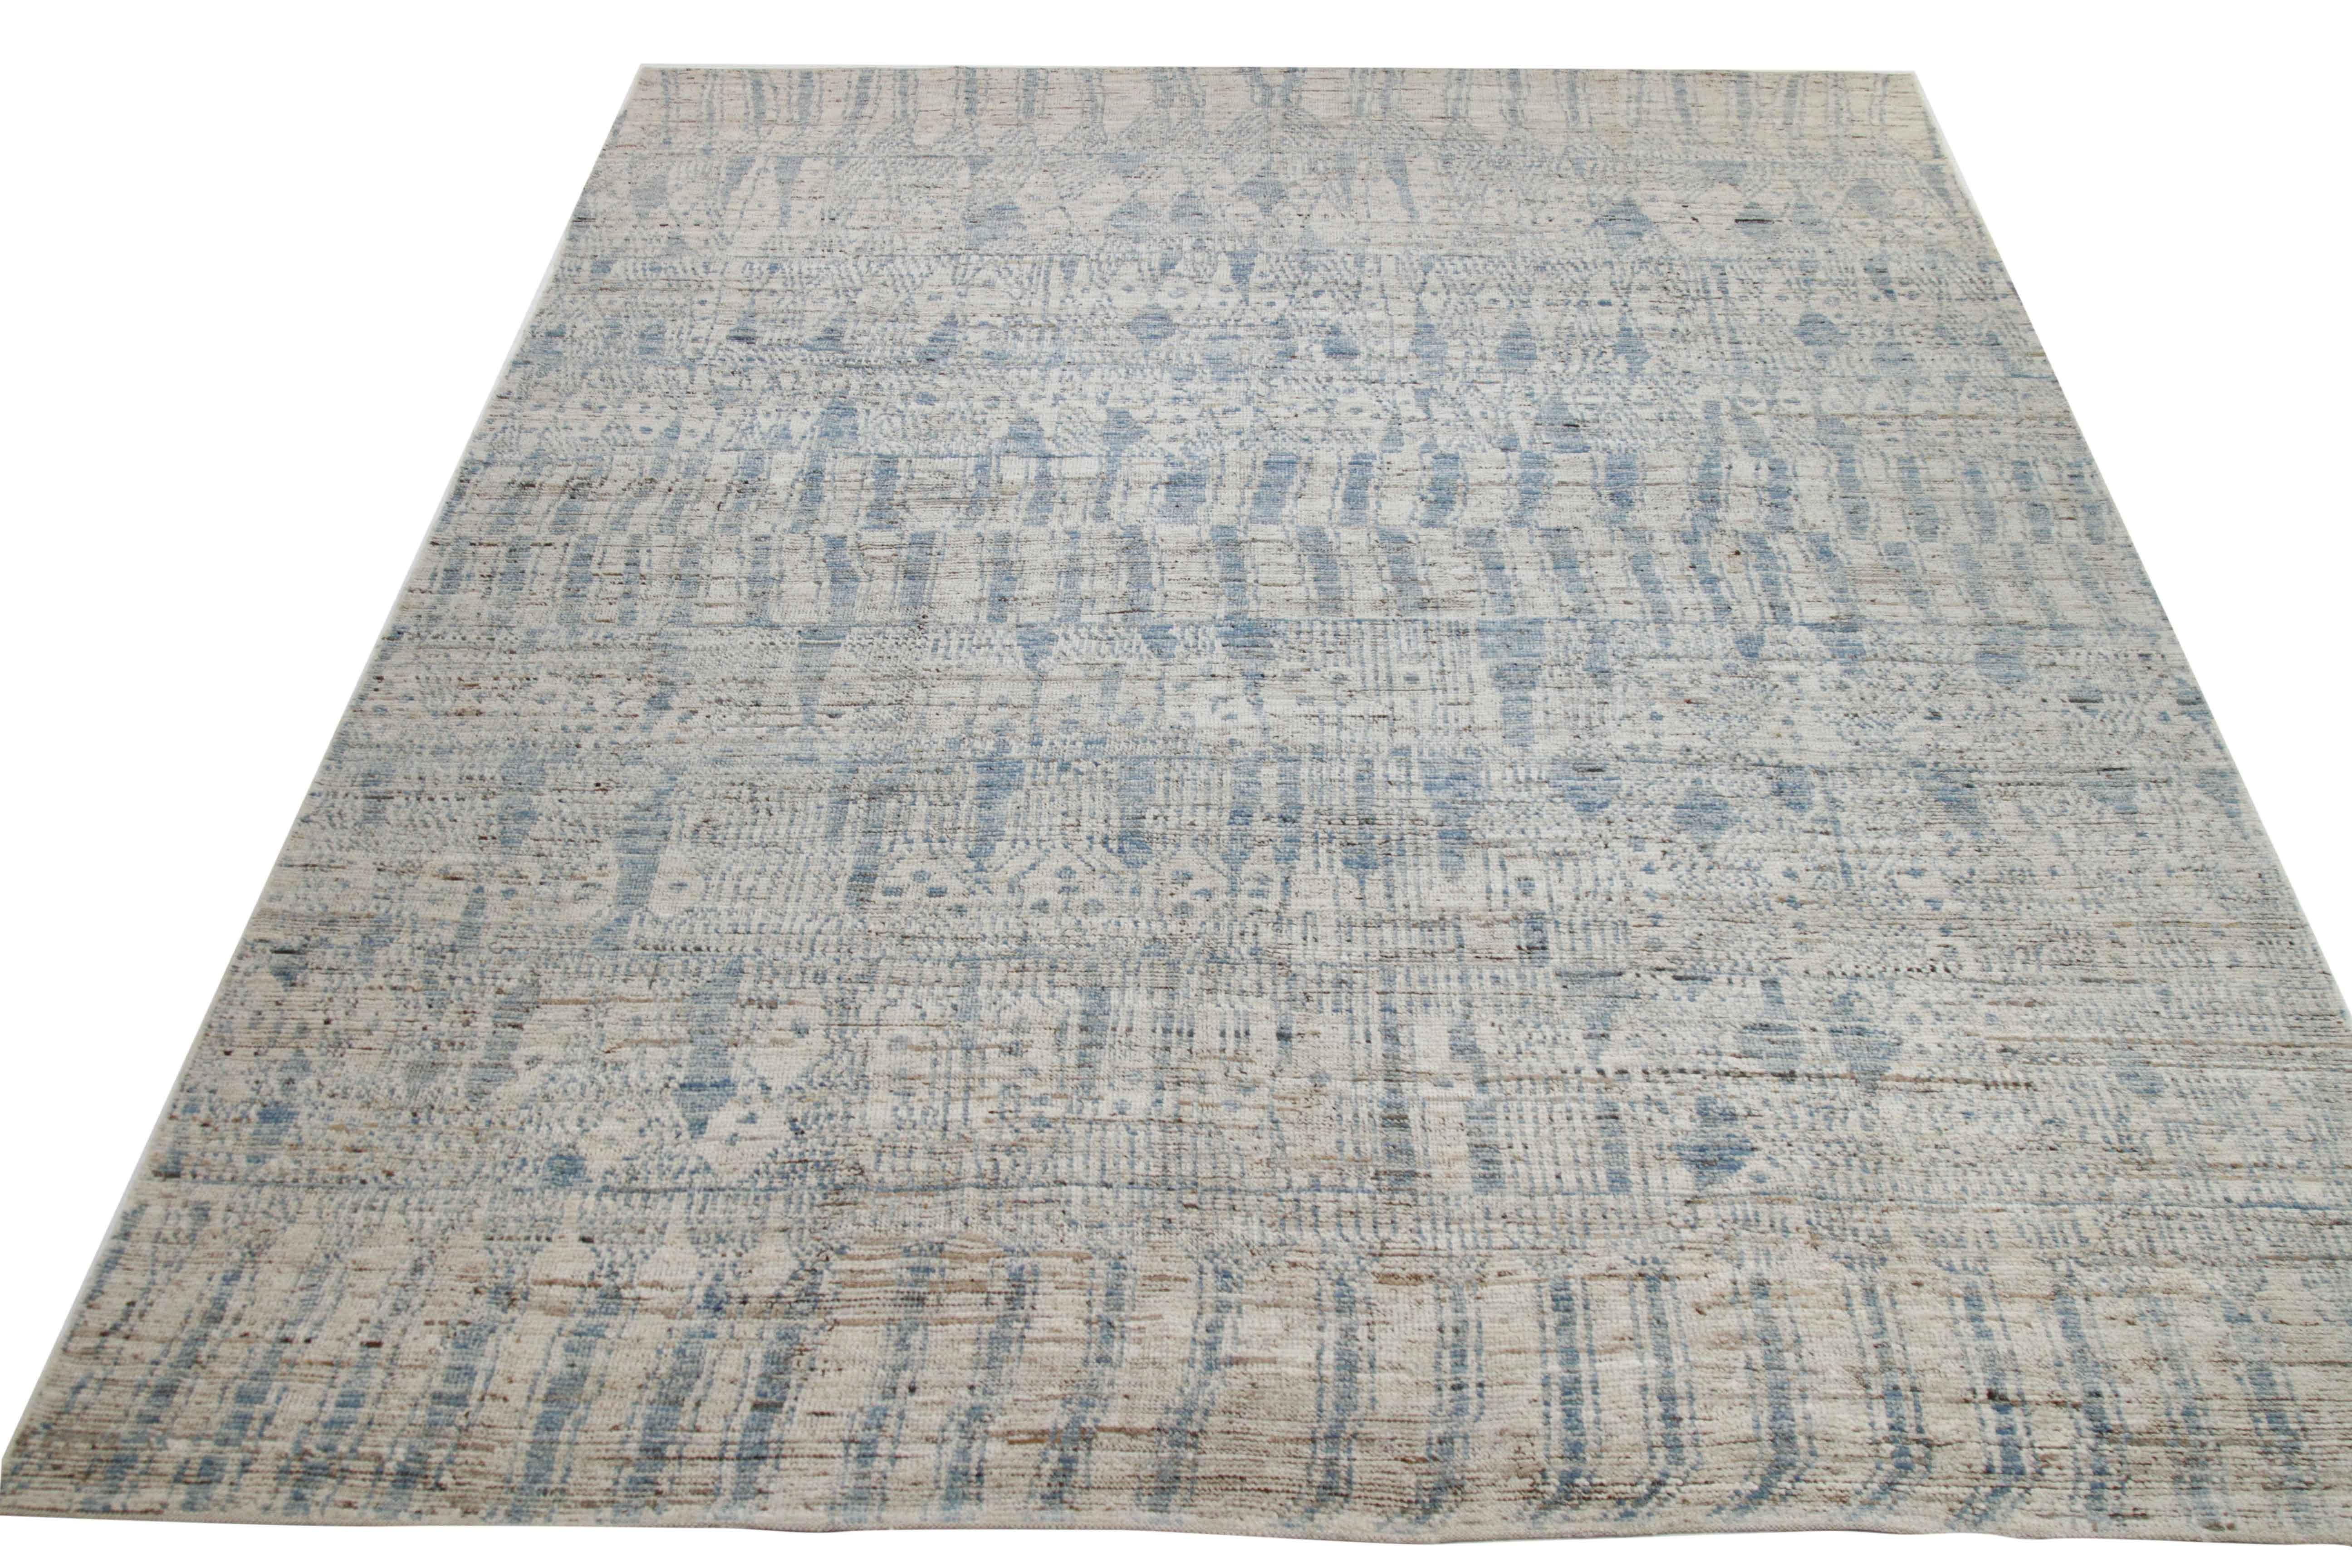 Modern Afghan rug handwoven from the finest sheep’s wool and colored with all-natural vegetable dyes that are safe for humans and pets. It’s a traditional Afghan weaving featuring a Moroccan inspired design highlighted by a mix of blue tribal